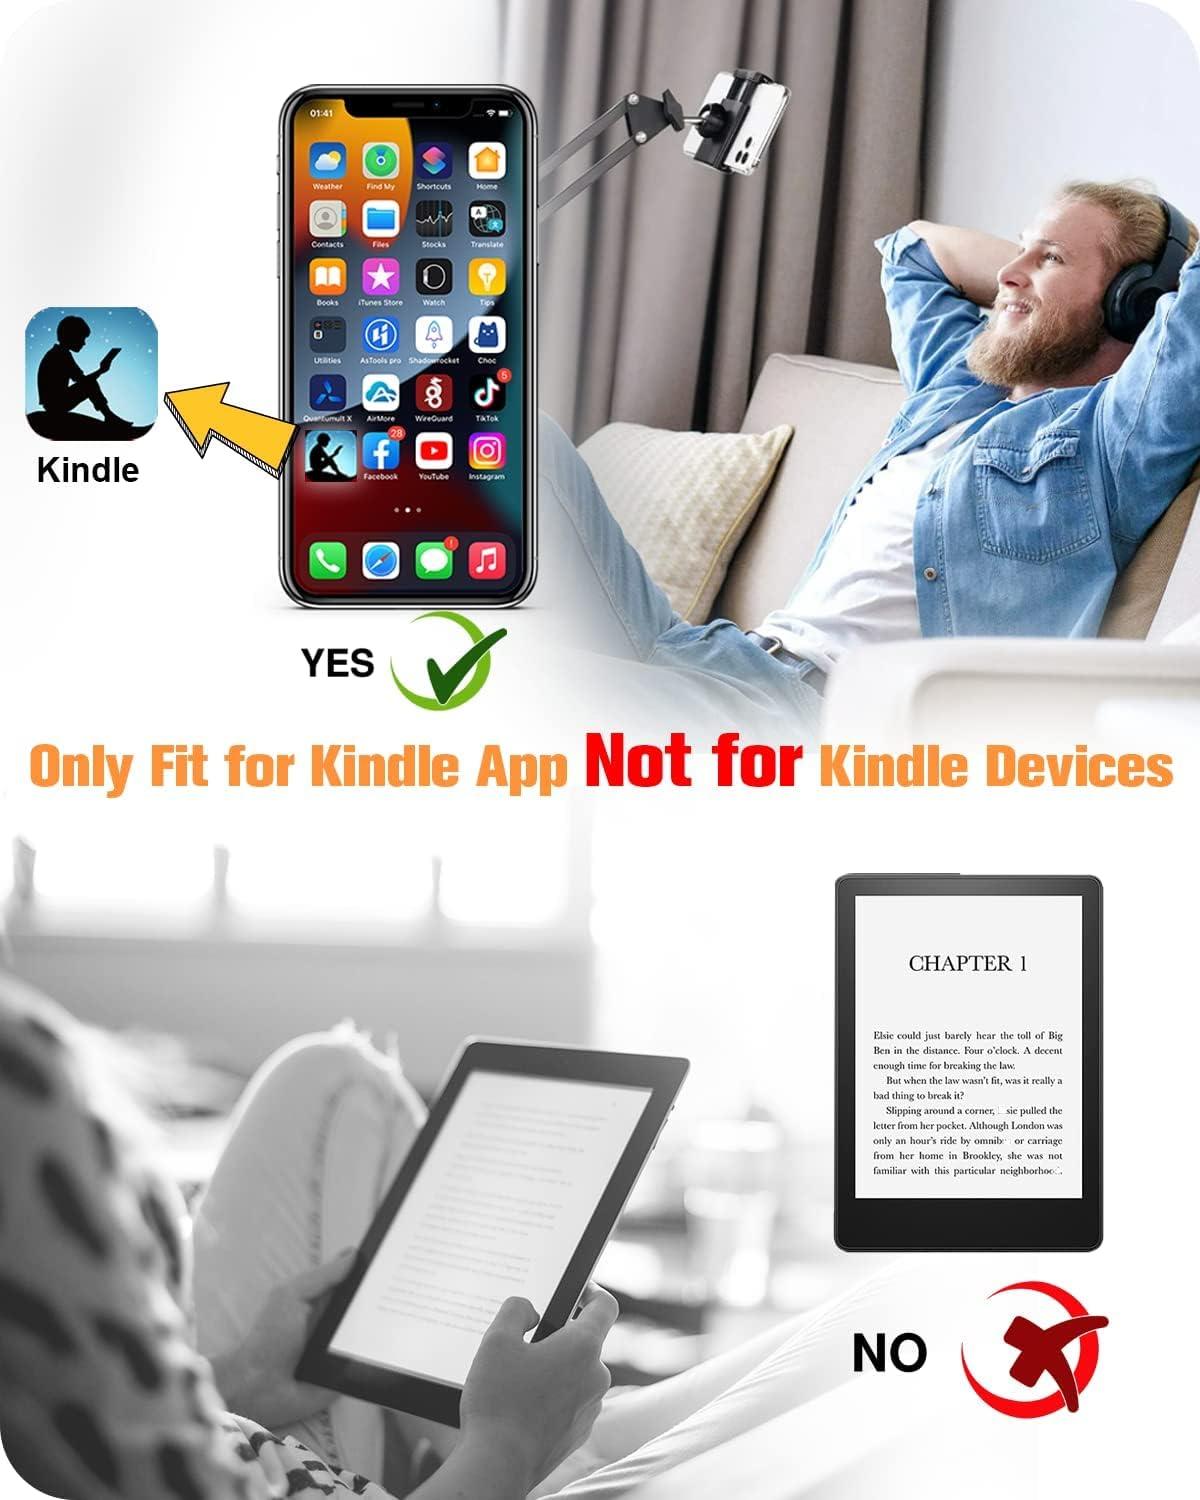 TikTok Remote Control Kindle App Page Turner, Bluetooth Camera Video  Recording Remote, TIK Tok Scrolling Ring for iPhone, iPad, iOS, Android 